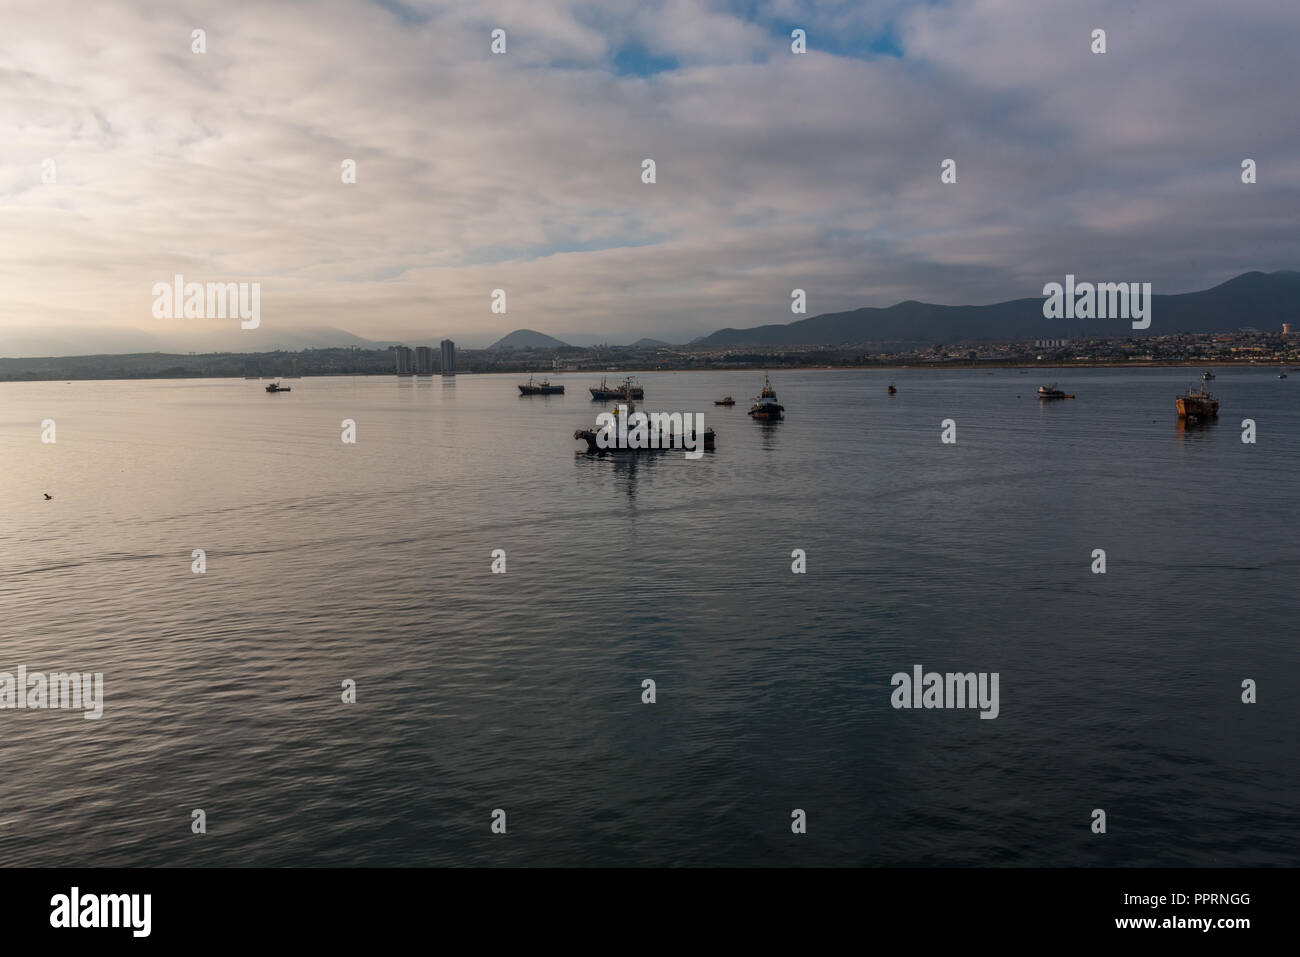 Morning is breaking over boats anchored in the calm waters off Coquimbo, Chile Stock Photo